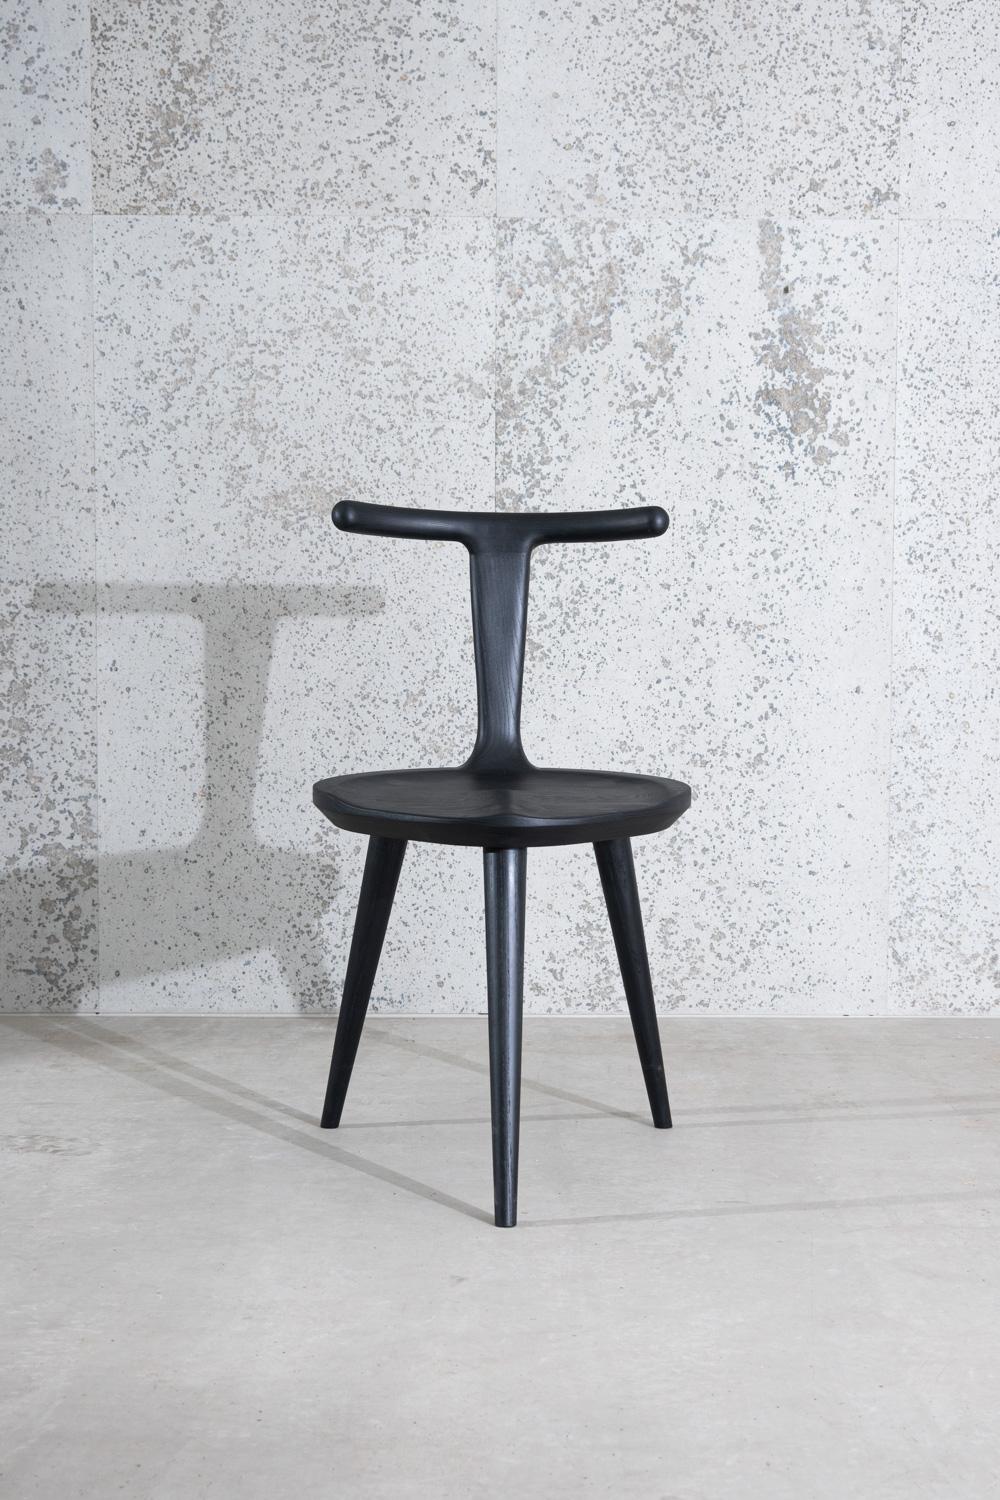 This listing includes one three-legged Oxbend chair in American ash hardwood stained charcoal black.

The original inspiration for the entire Oxbend collection, this modern dining chair was designed by Justin Nelson for Fernweh Woodworking. Born